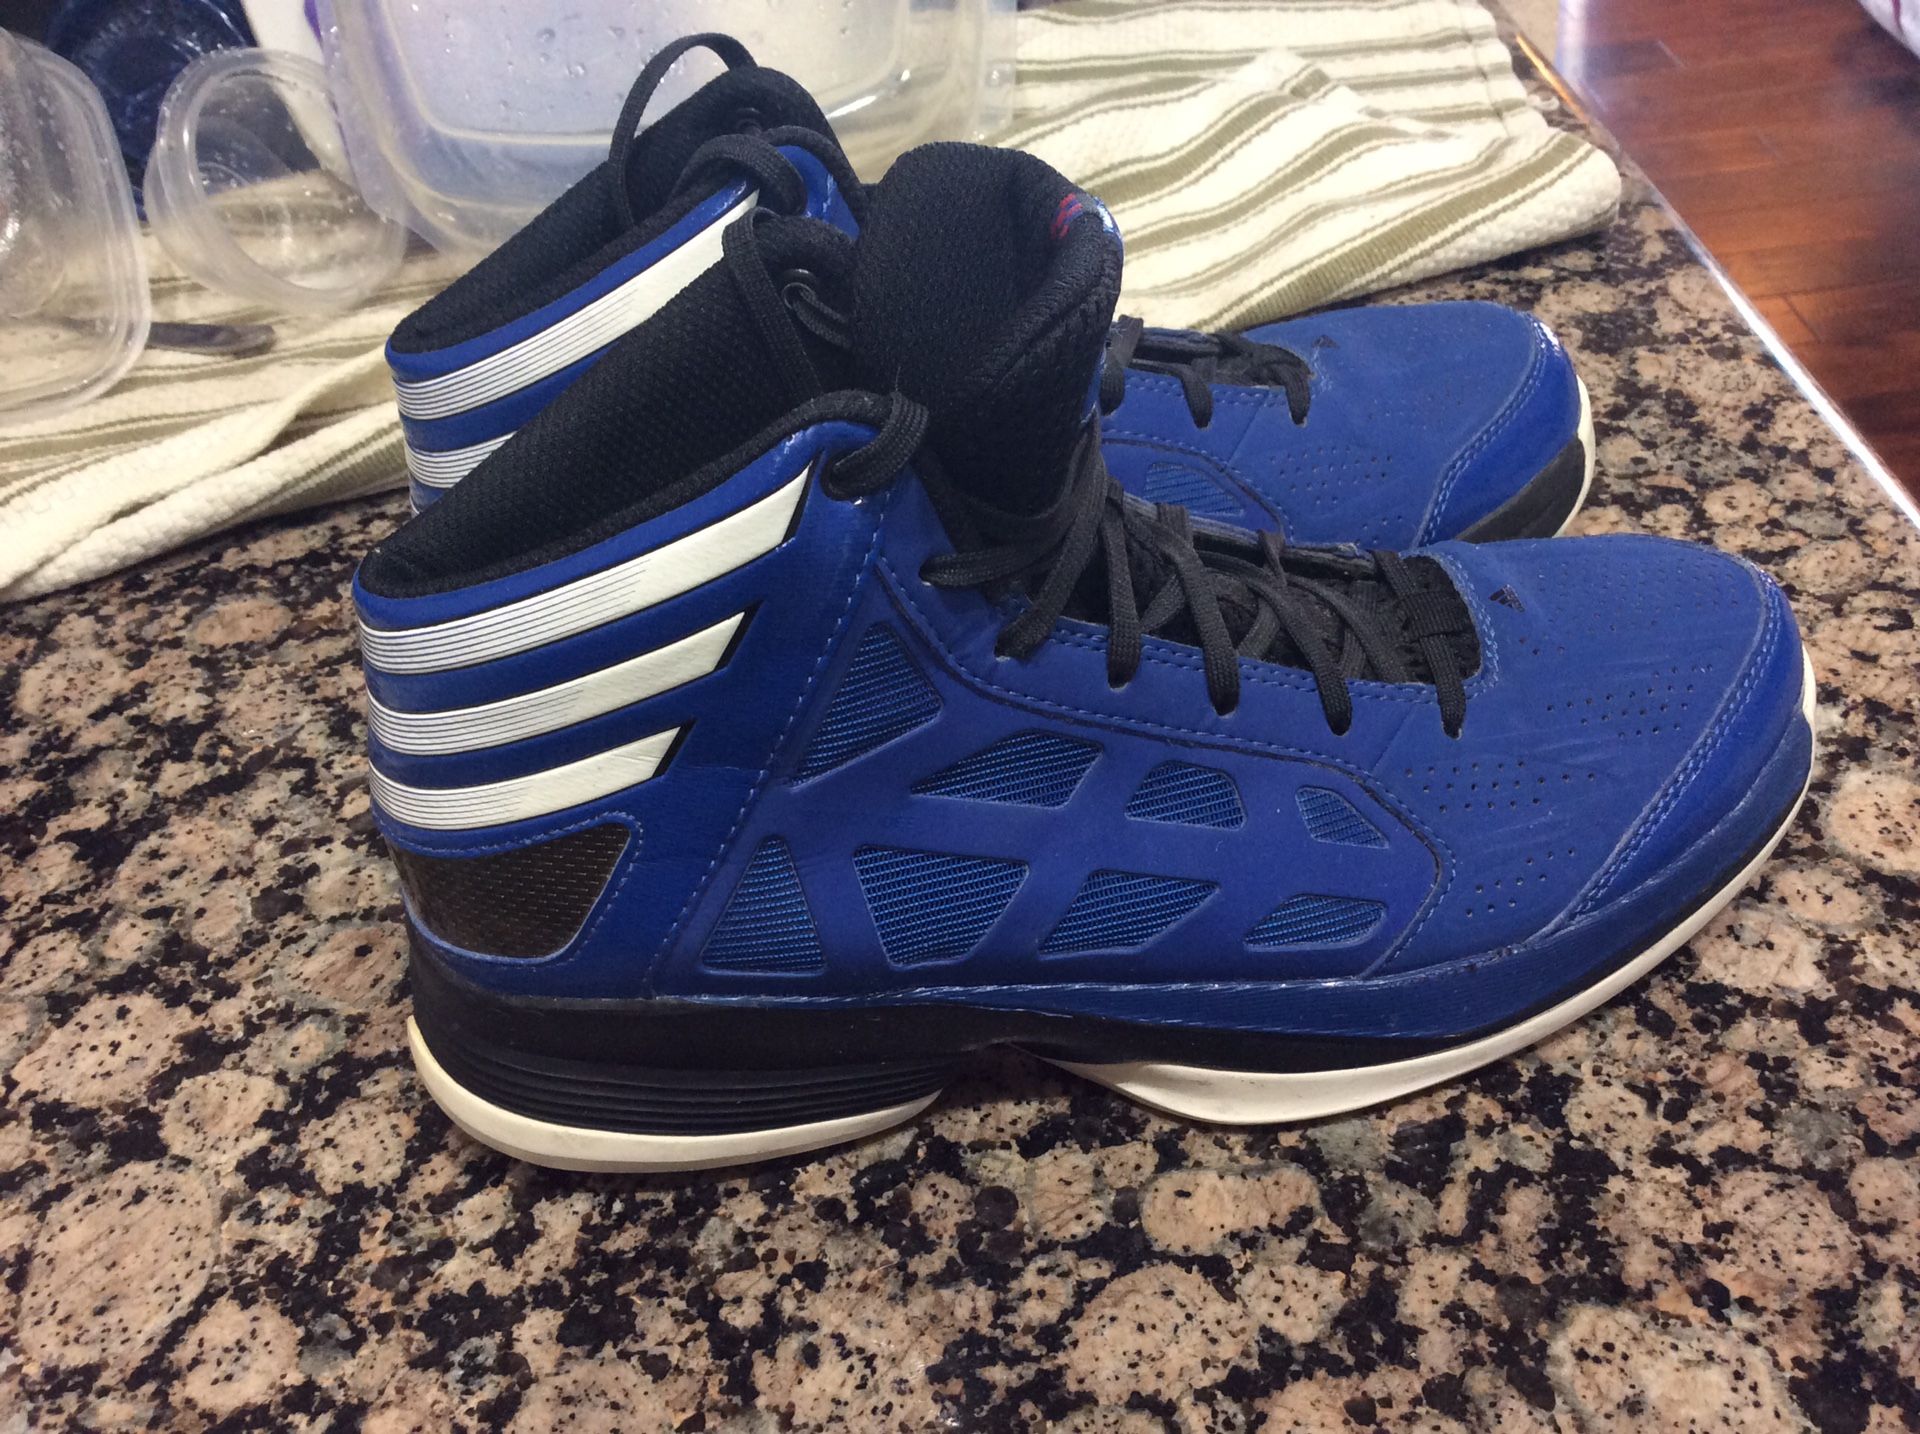 ADIDAS Crazy Shadow basketball shoes. Men’s size 6